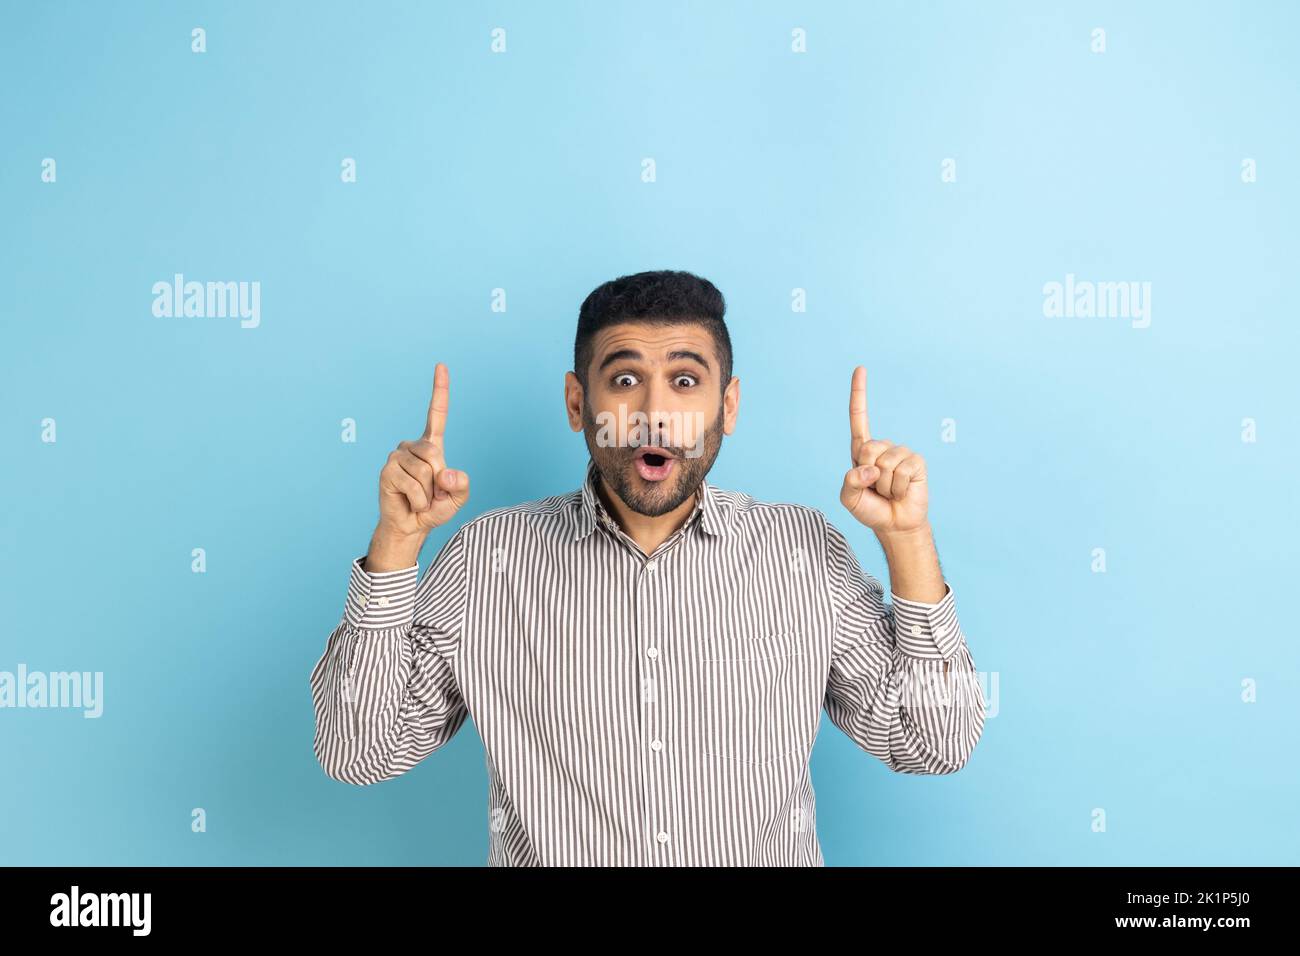 Wow, look, crazy advertisement. Bearded businessman pointing up at empty place for ad content and expressing astonishment, wearing striped shirt. Indoor studio shot isolated on blue background. Stock Photo